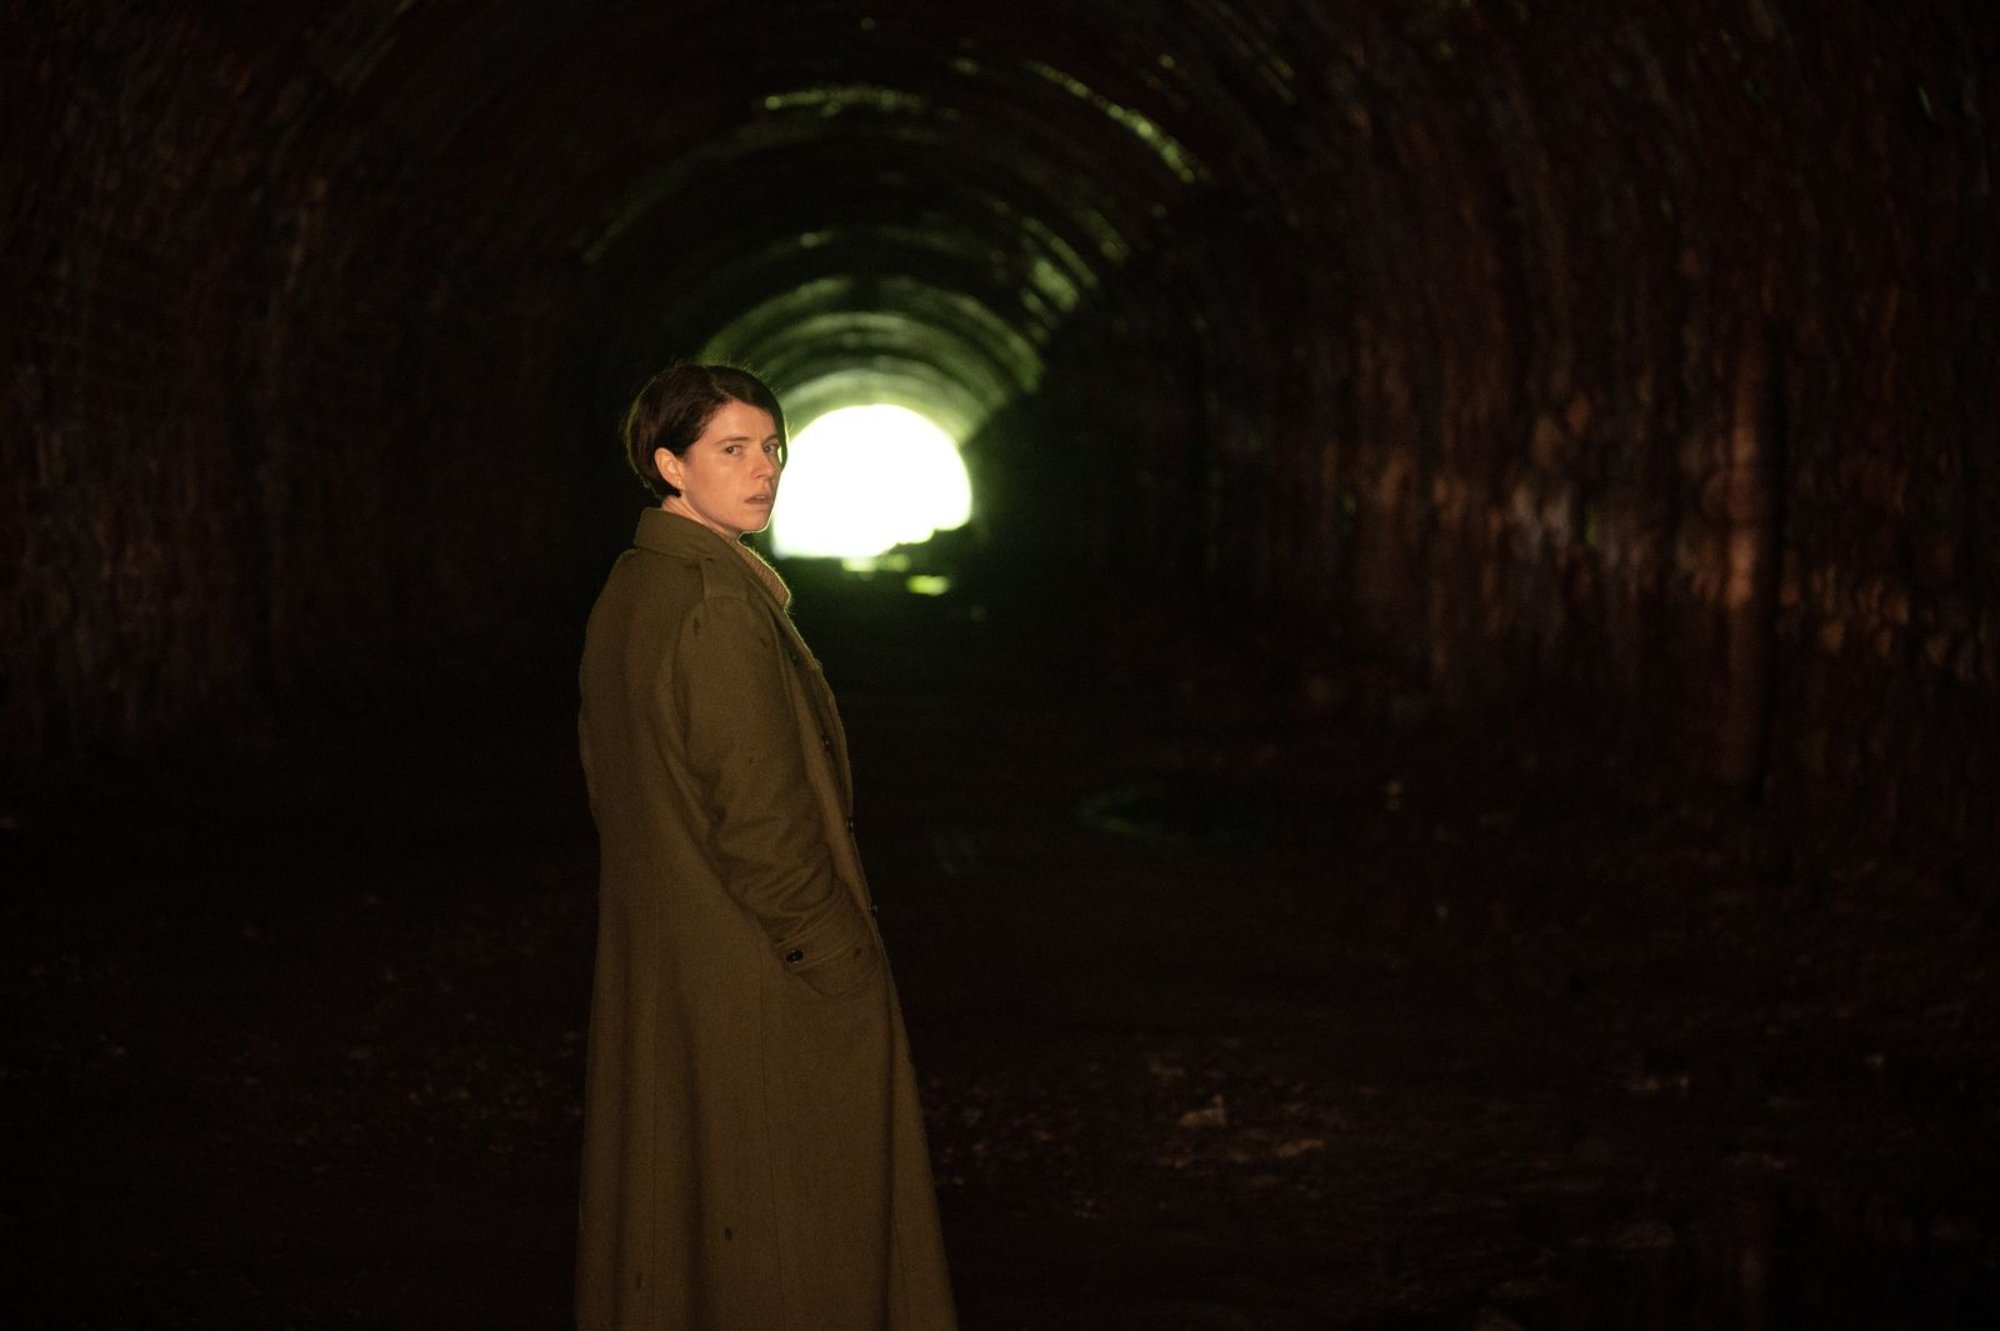 Jessie Buckley as Harper in 'Men', an A24 film about toxic masculinity standing in a tunnel looking over her shoulder